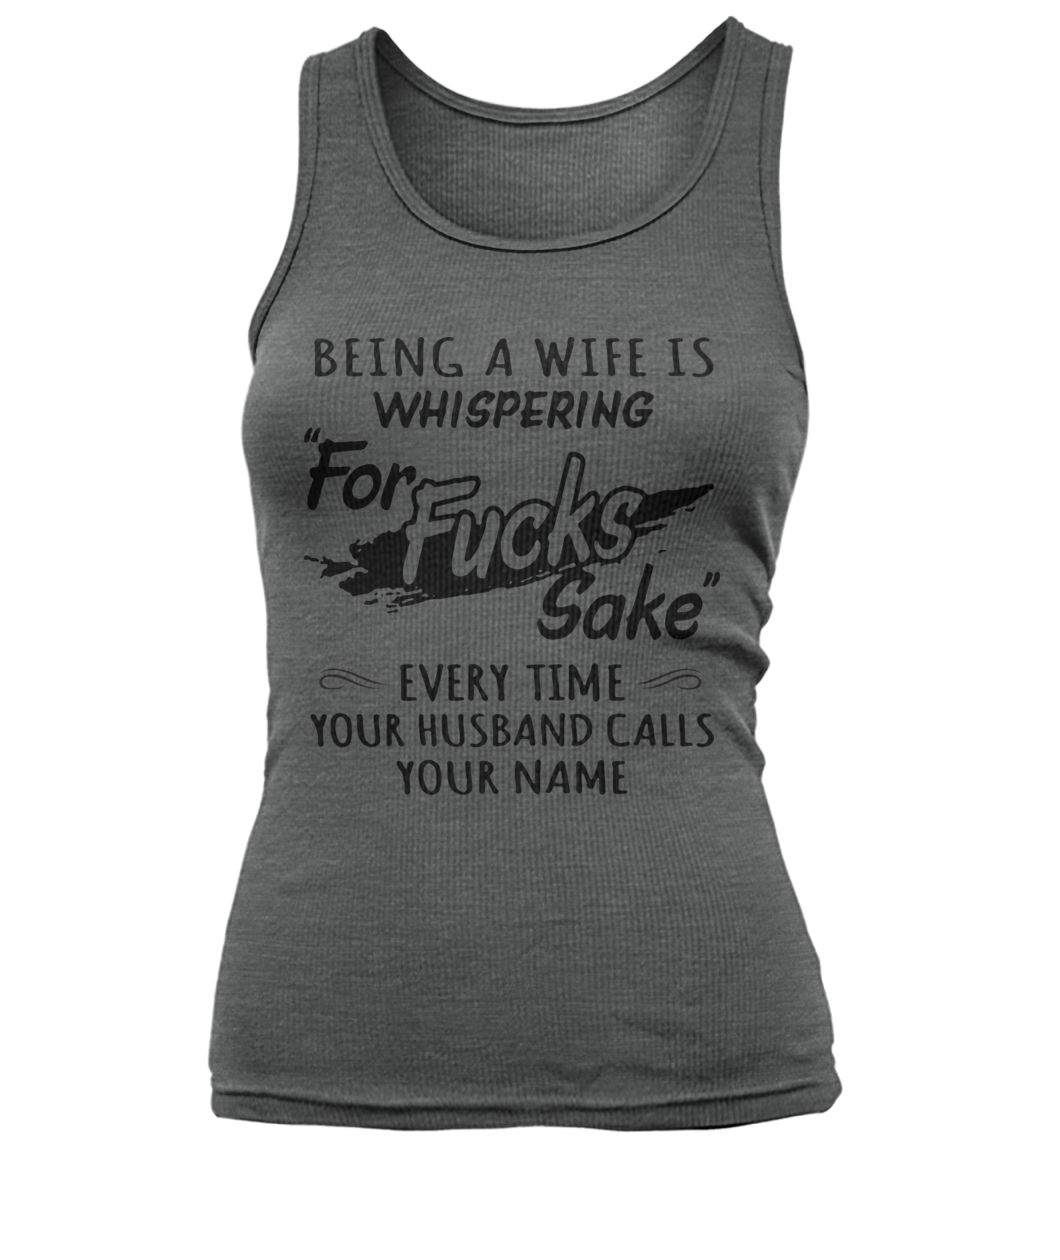 Being a wife is whispering for fucks fake every time your husband call your name women's tank top